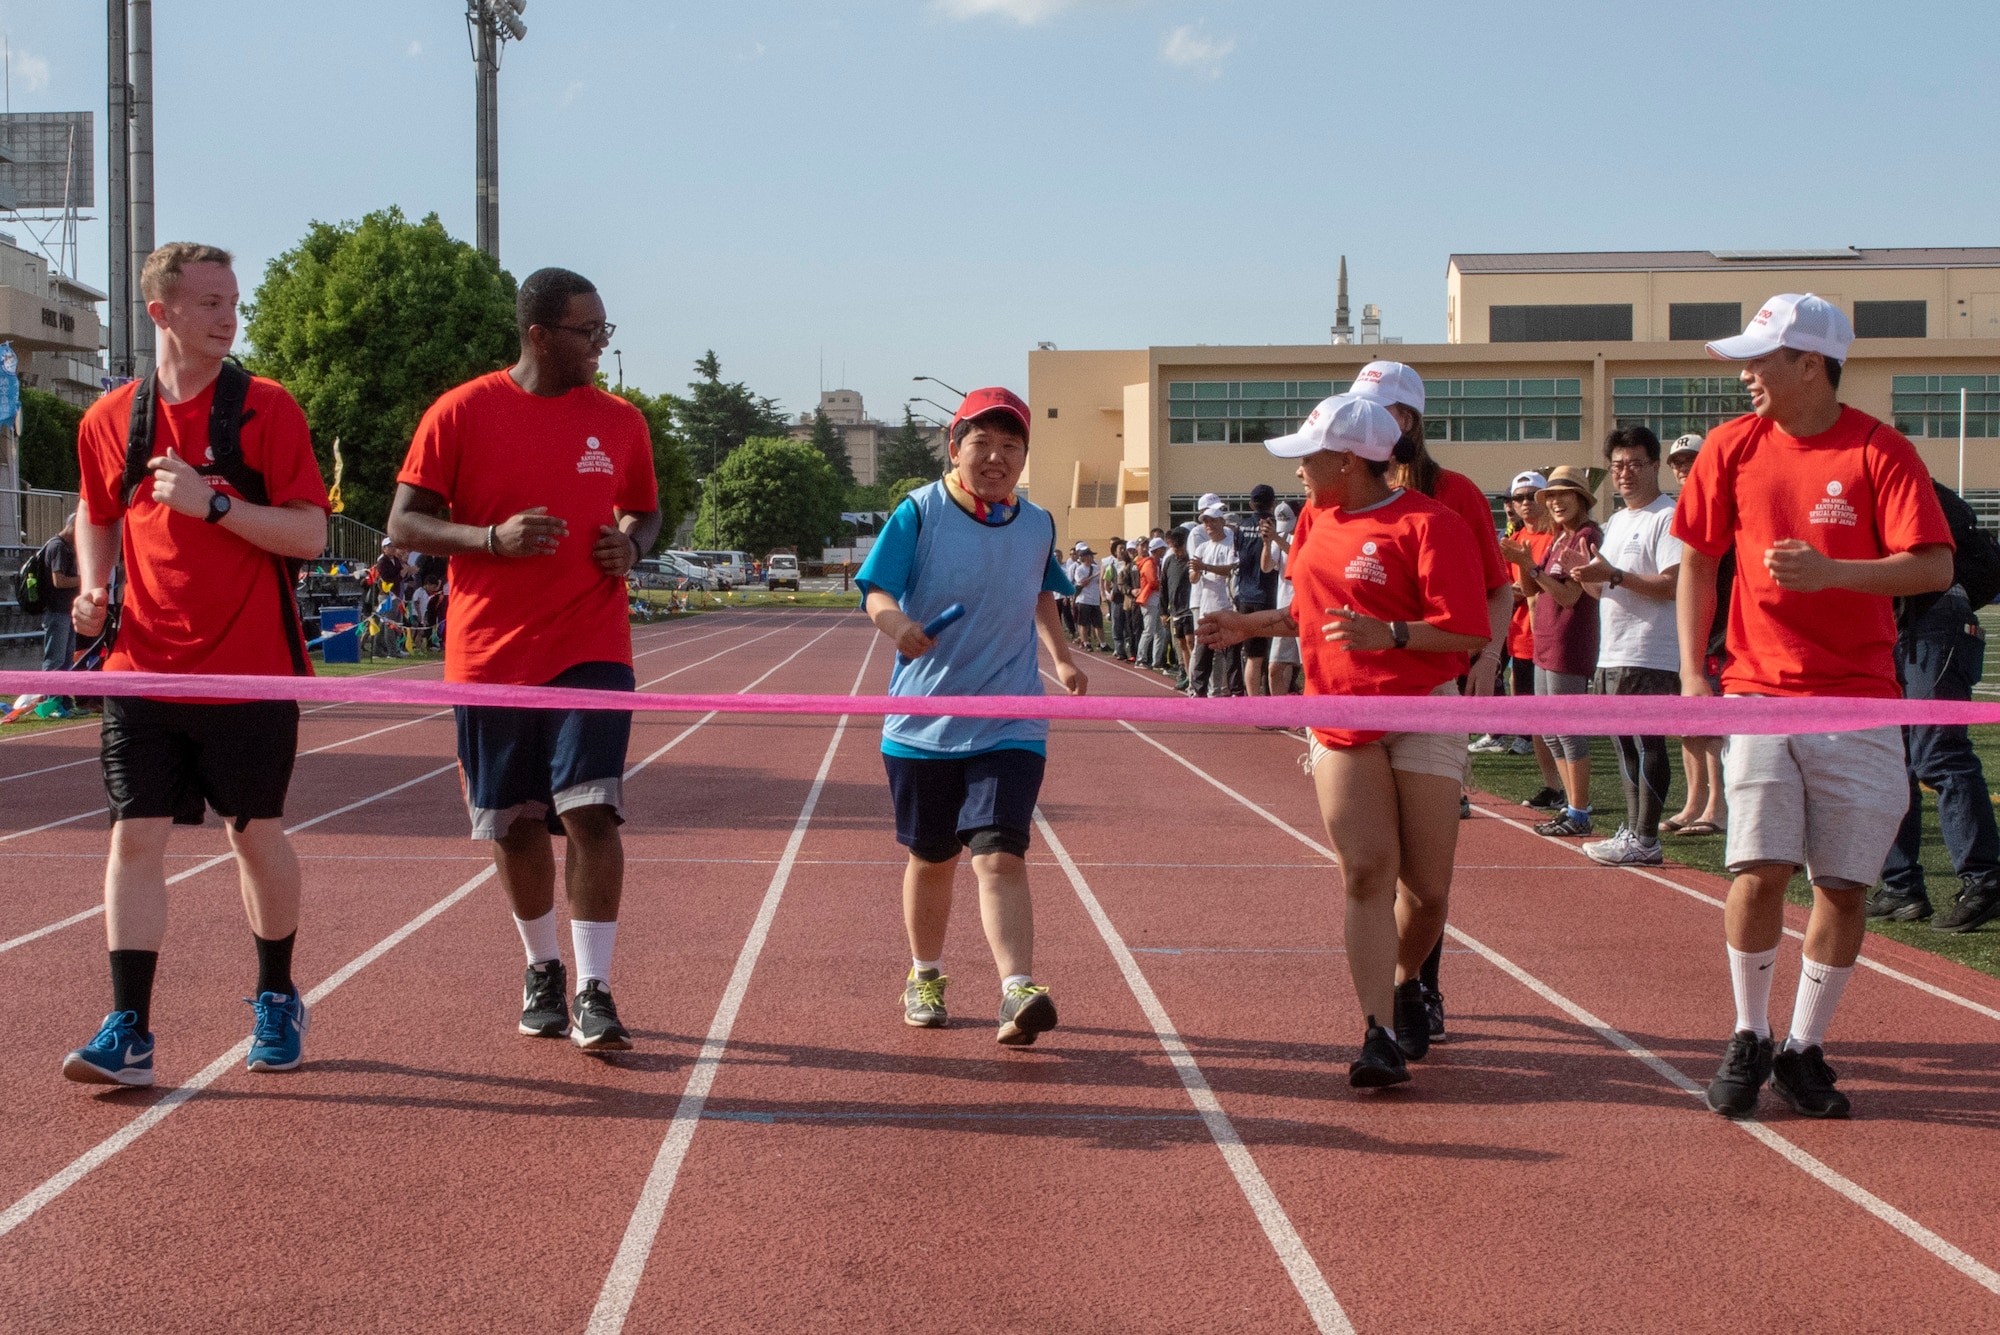 Five volunteer athlete buddies cheer on an athlete during the 4x100 meter relay race during the Kanto Plains Special Olympics at Yokota Air Base, Japan, May 19, 2018.